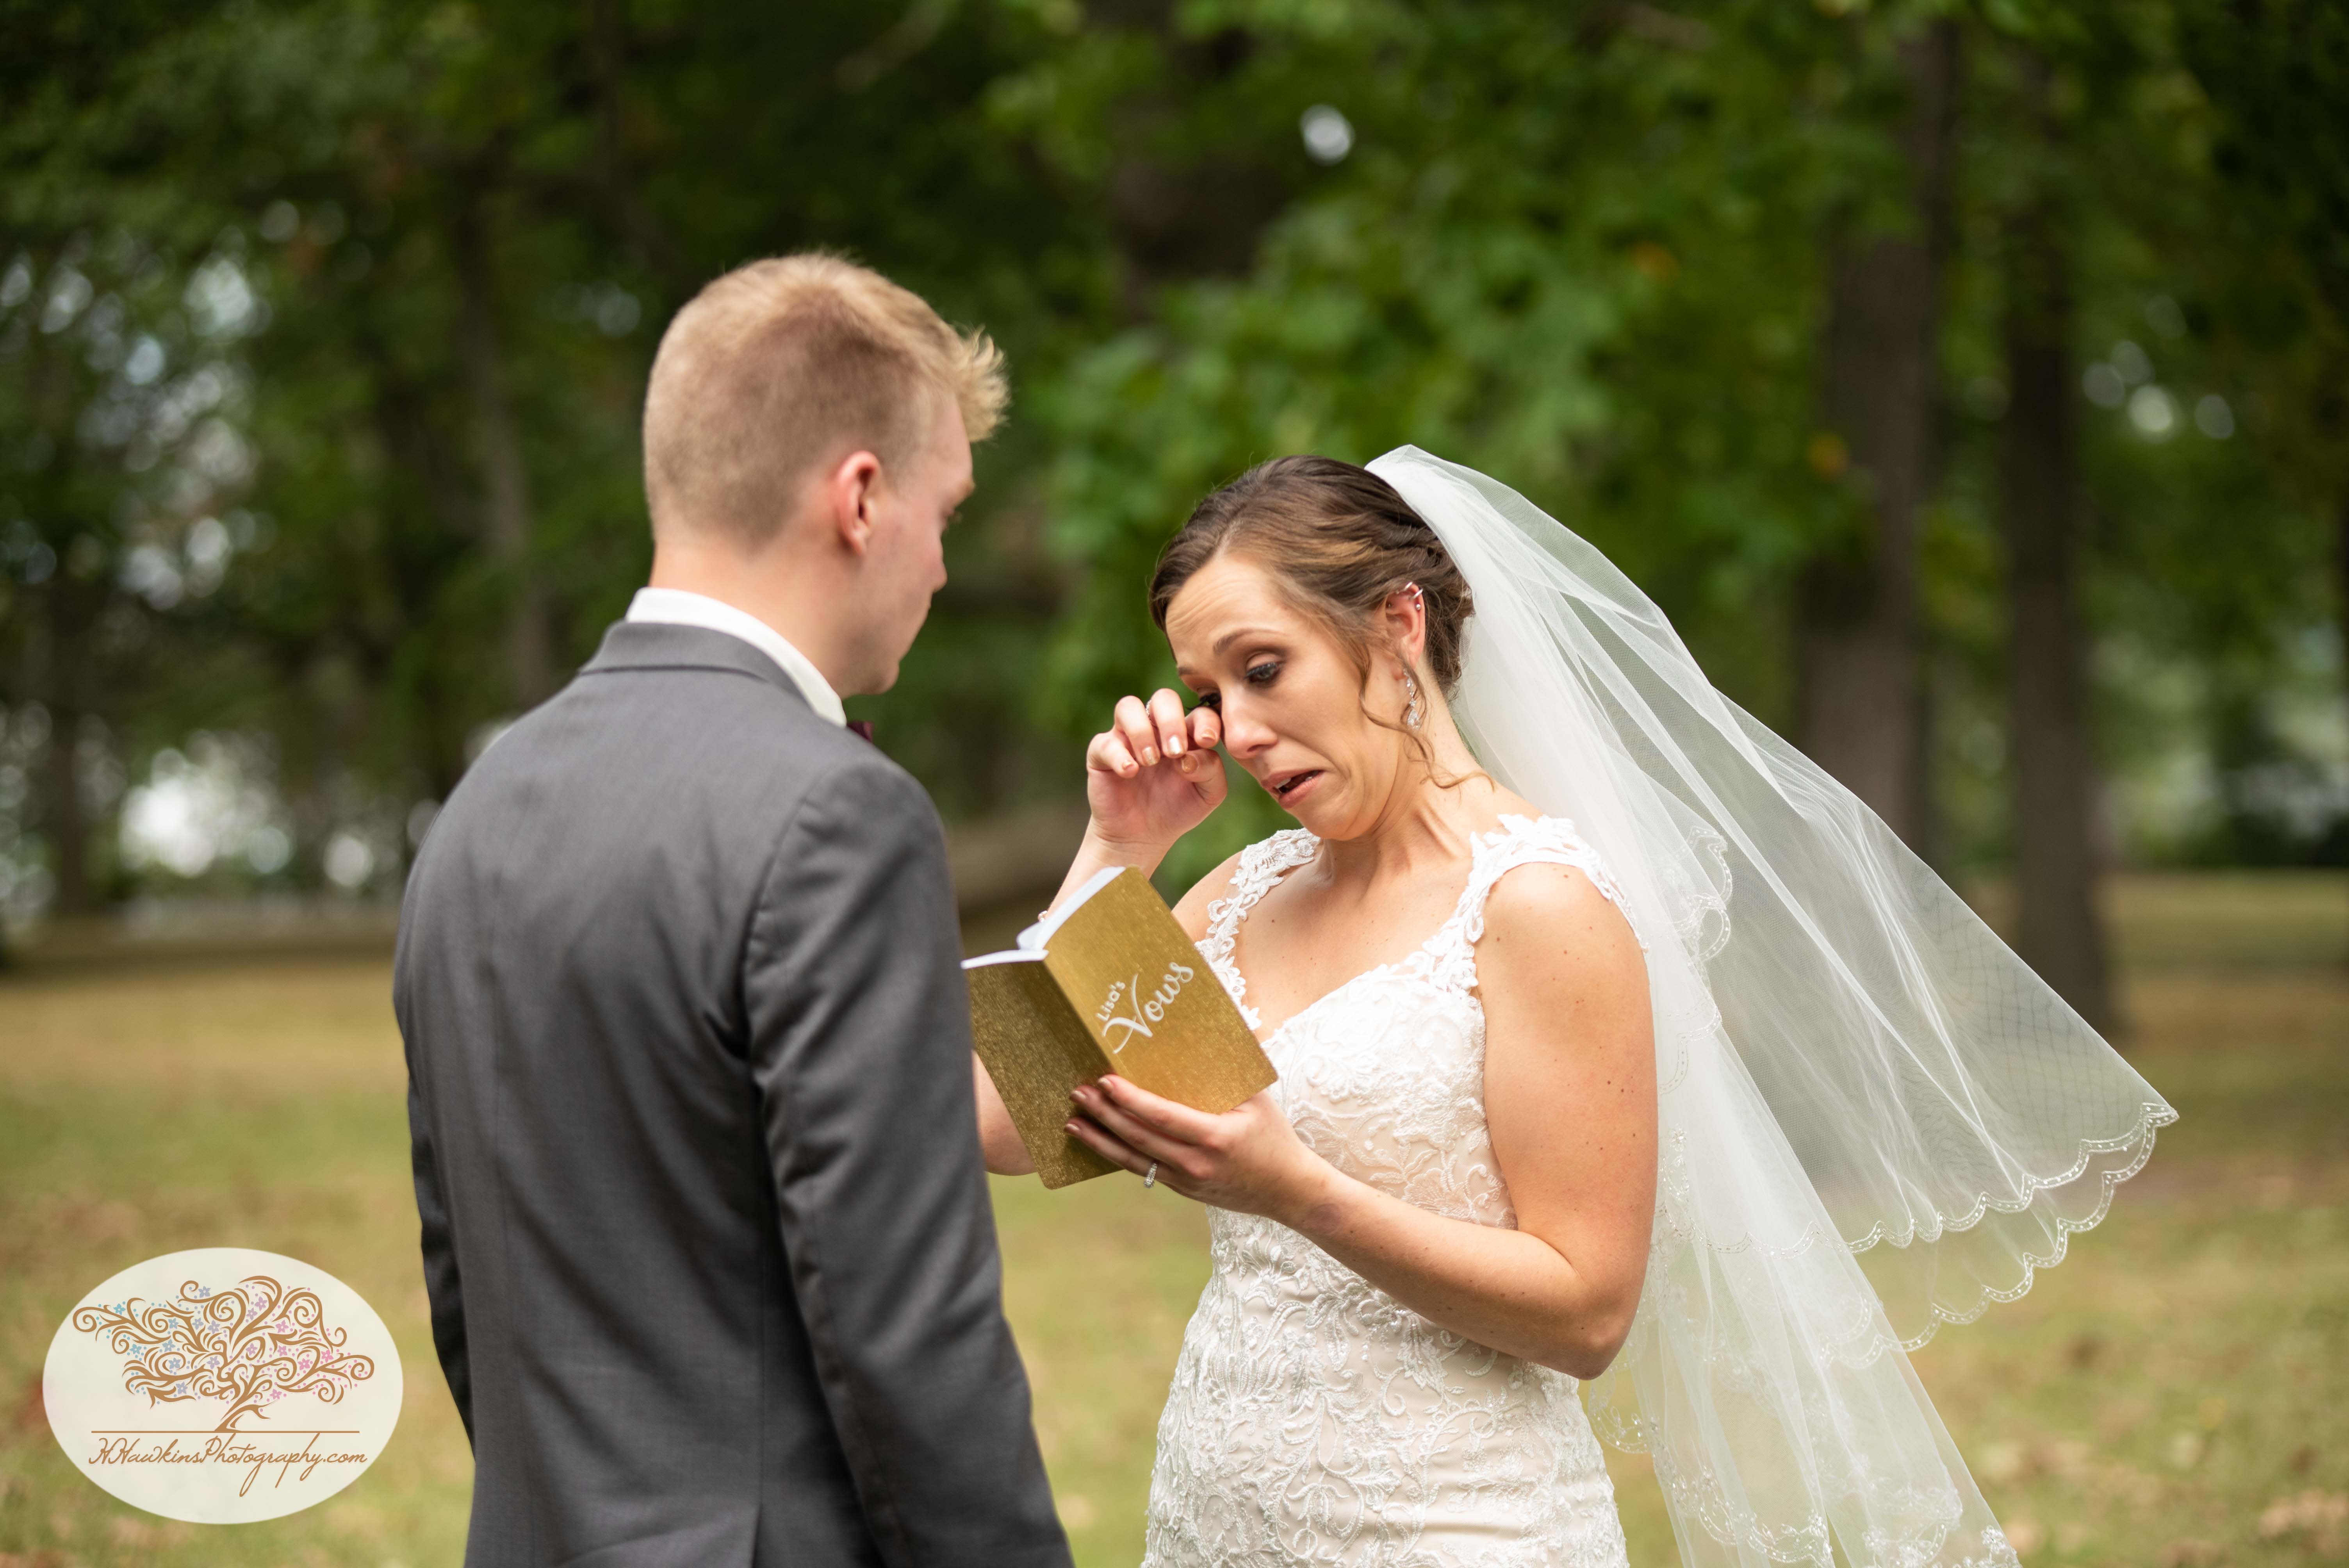 Bride wipes a tear from her eye while reading her vows to her groom